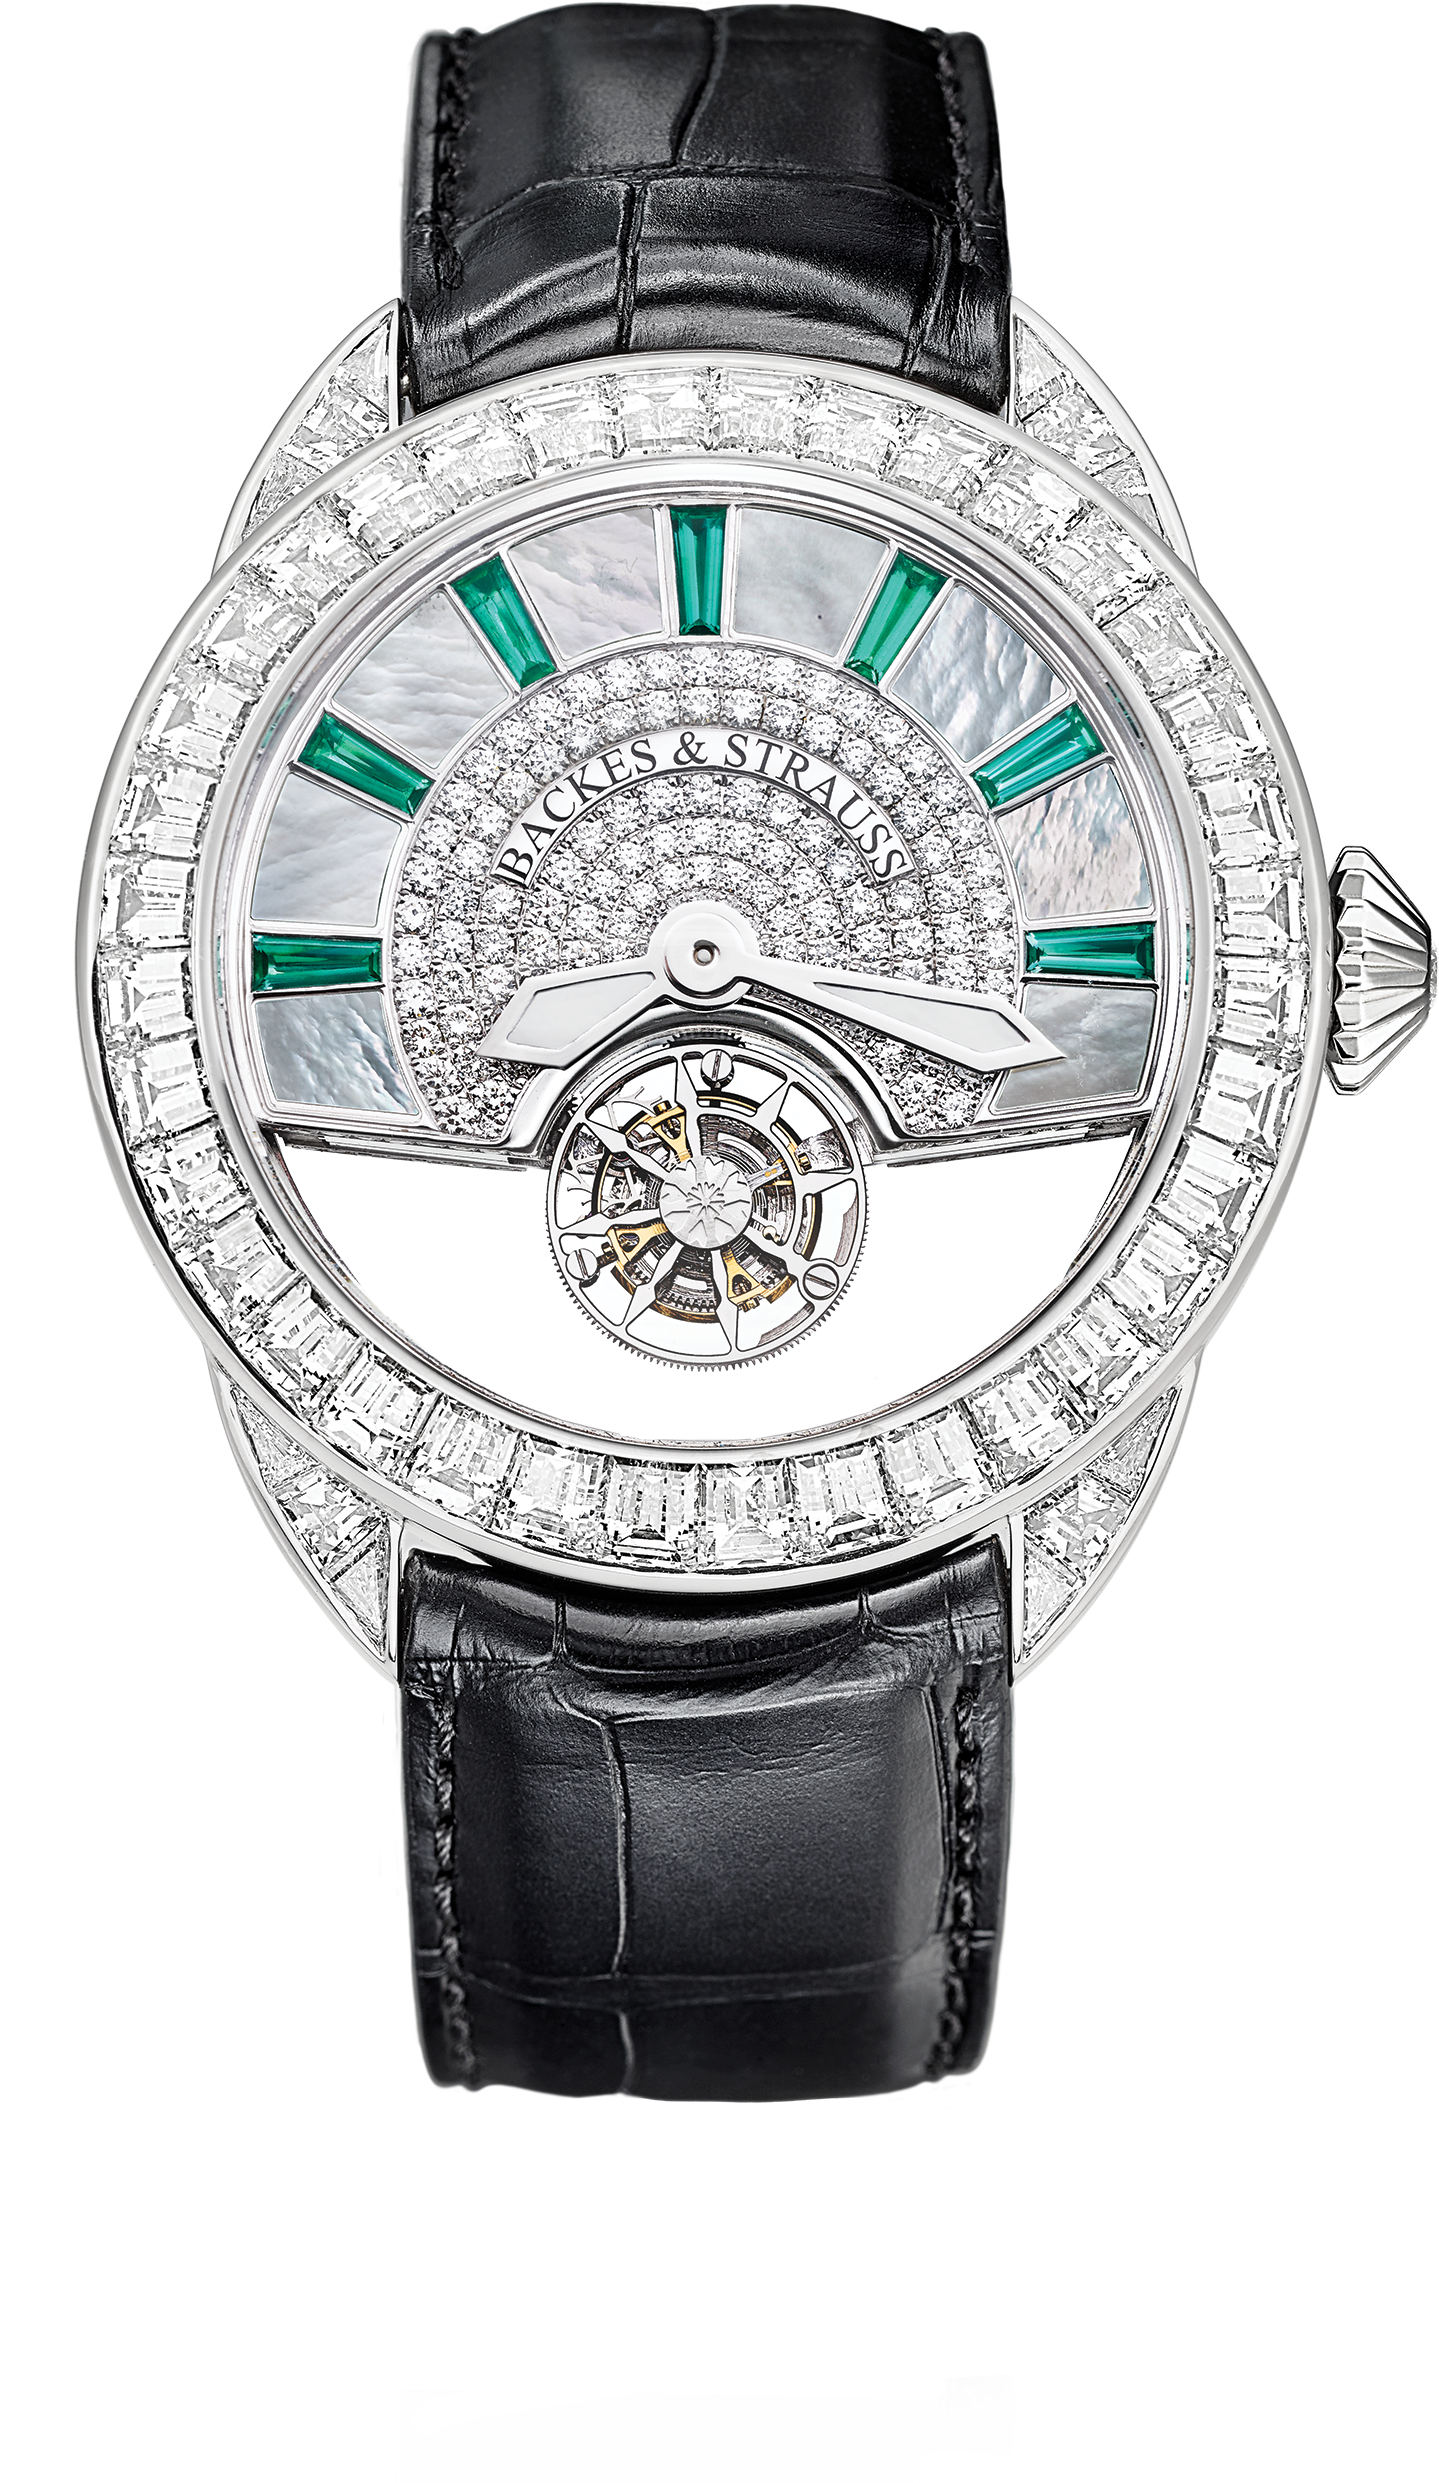 Piccadilly 45 King Tourbillon iconic diamond encrusted watch